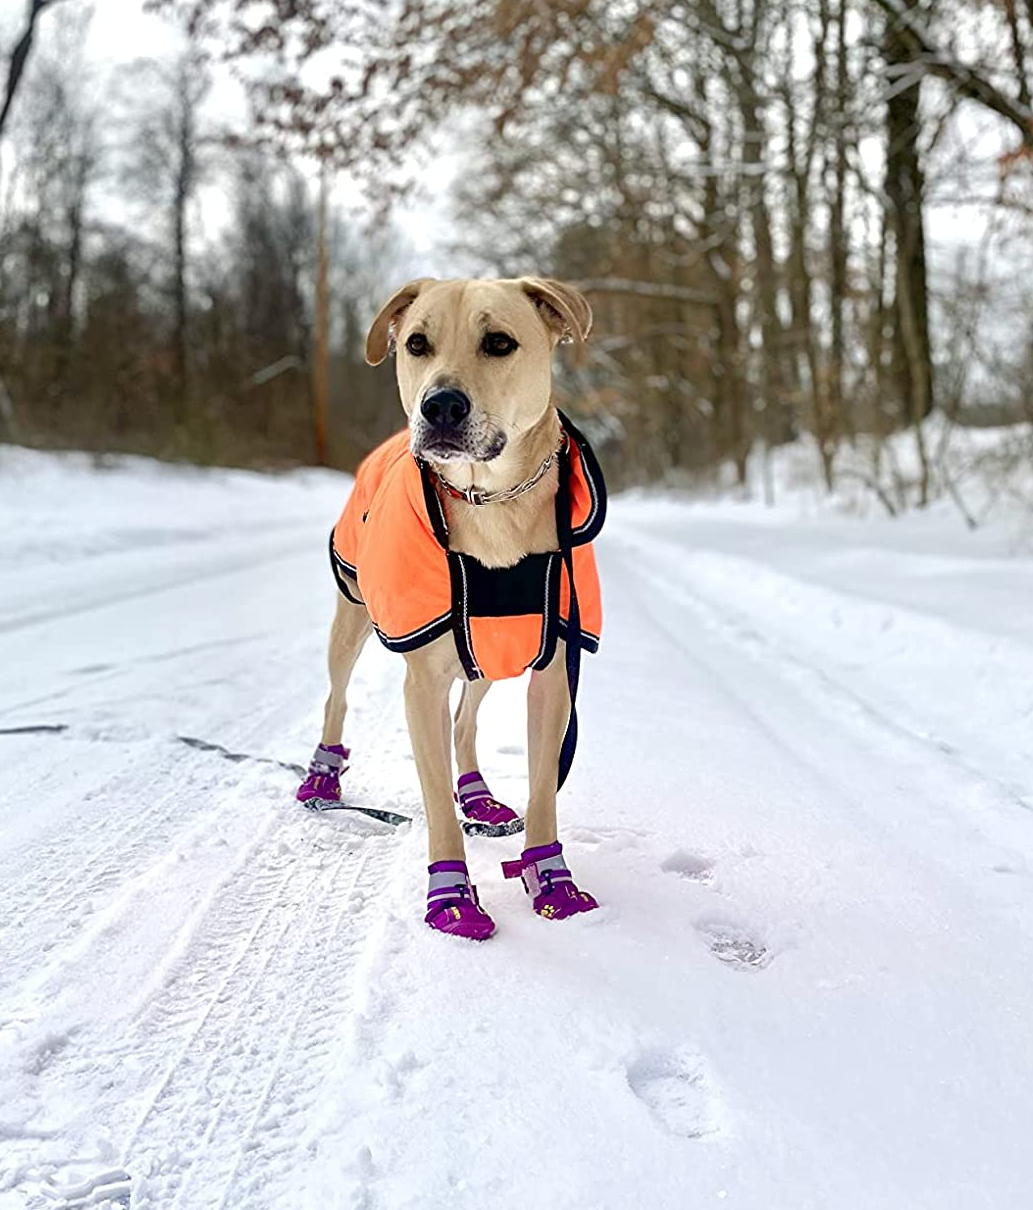 19 Toys to Keep Your Pet Active This Winter